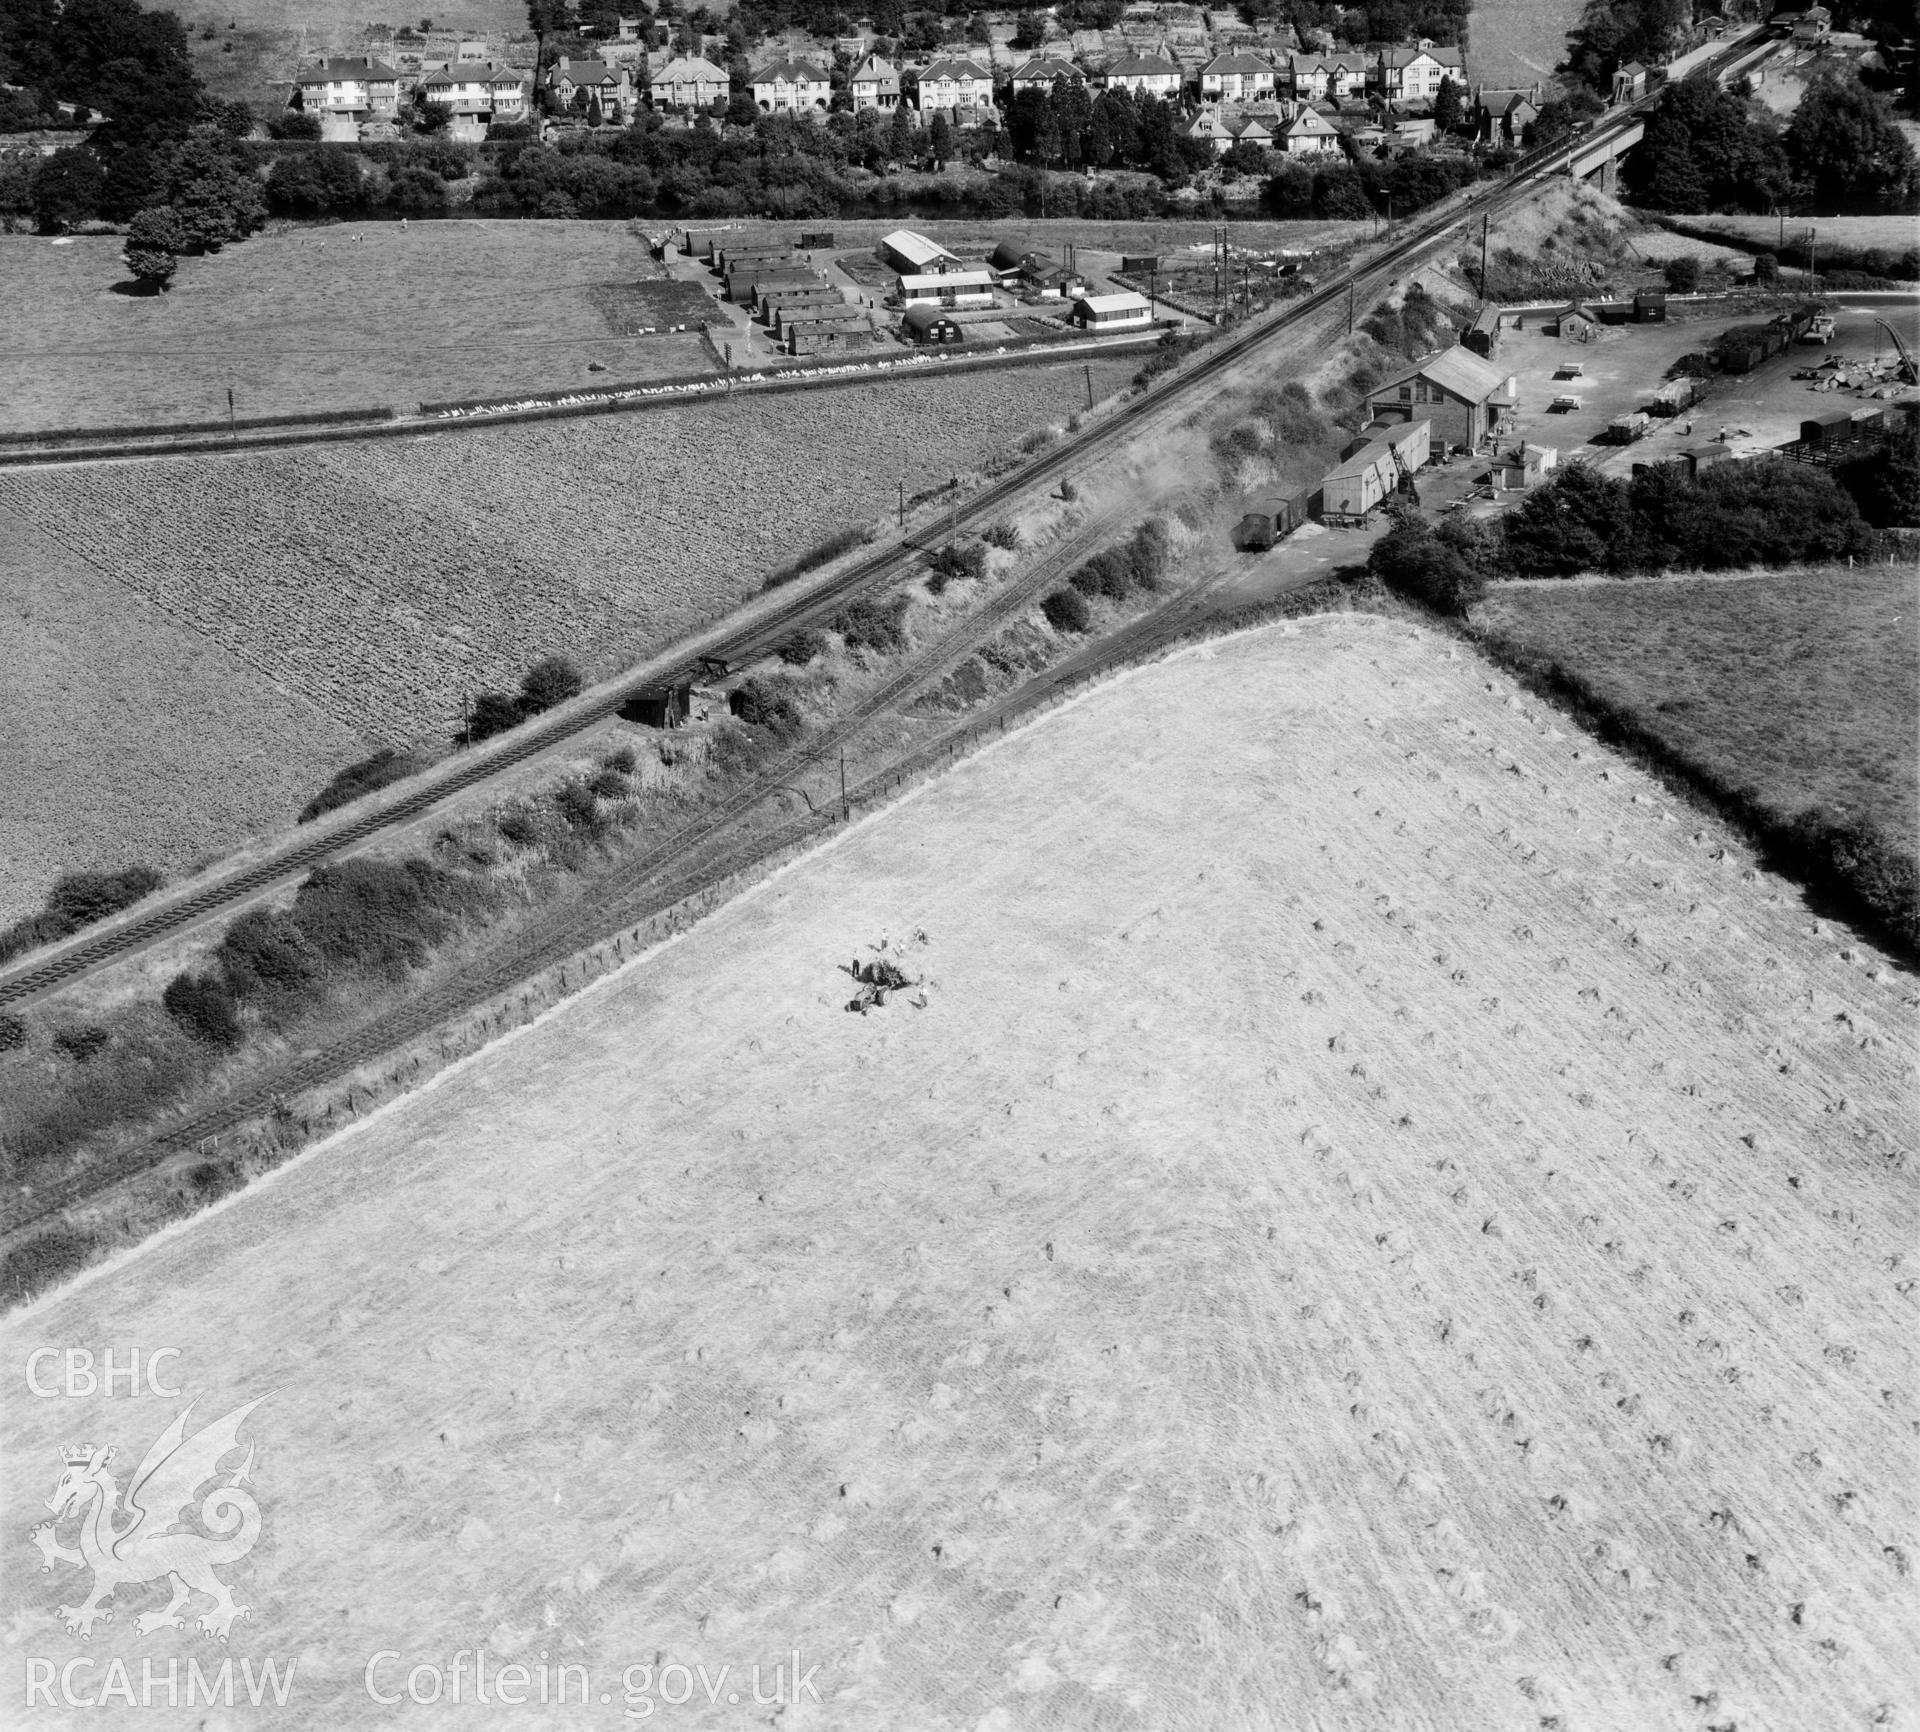 View of Coleford, Monmouth, Usk & Pontypool railway goods yard, north east of Usk, showing men with tractor and haycocks and an unidentified military camp. Oblique aerial photograph, 5?" cut roll film.